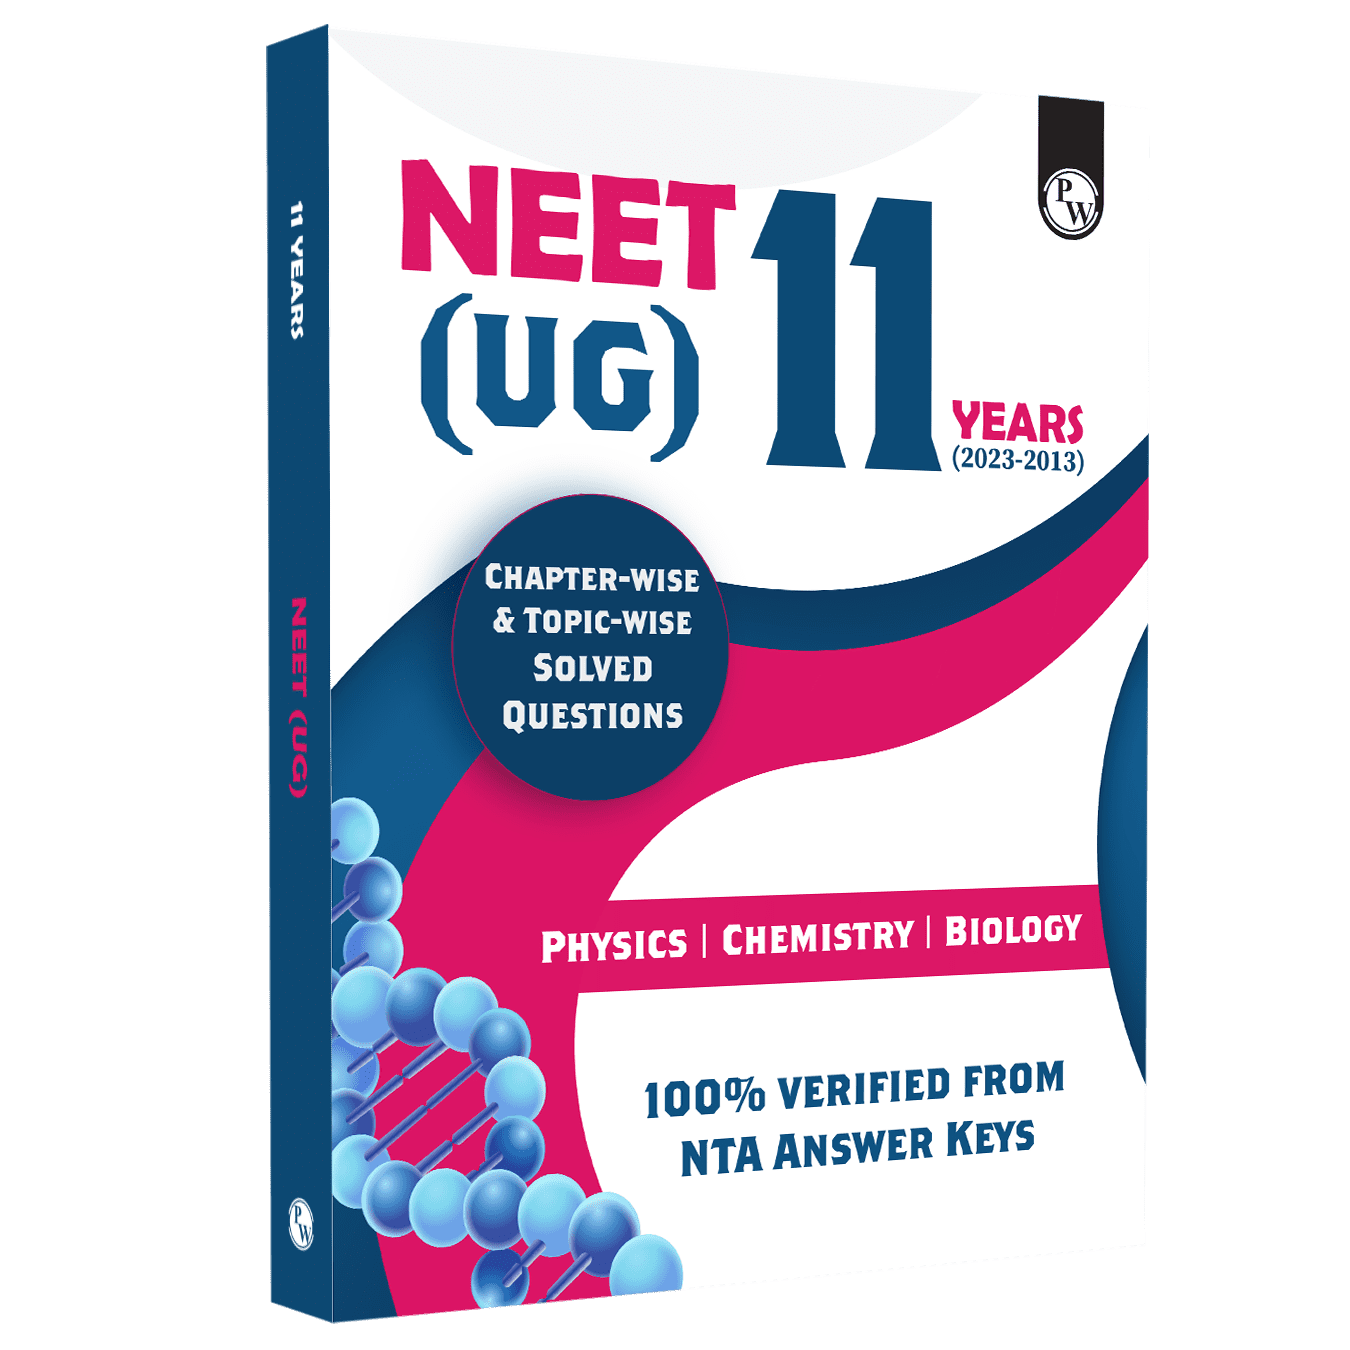 NEET (UG) 11 Years (2023 - 2013) Chapter-wise & Topic-wise Solved Questions (Physics, Chemistry, Biology) | NTA NEET PYQs | 100% Verified Solved Papers